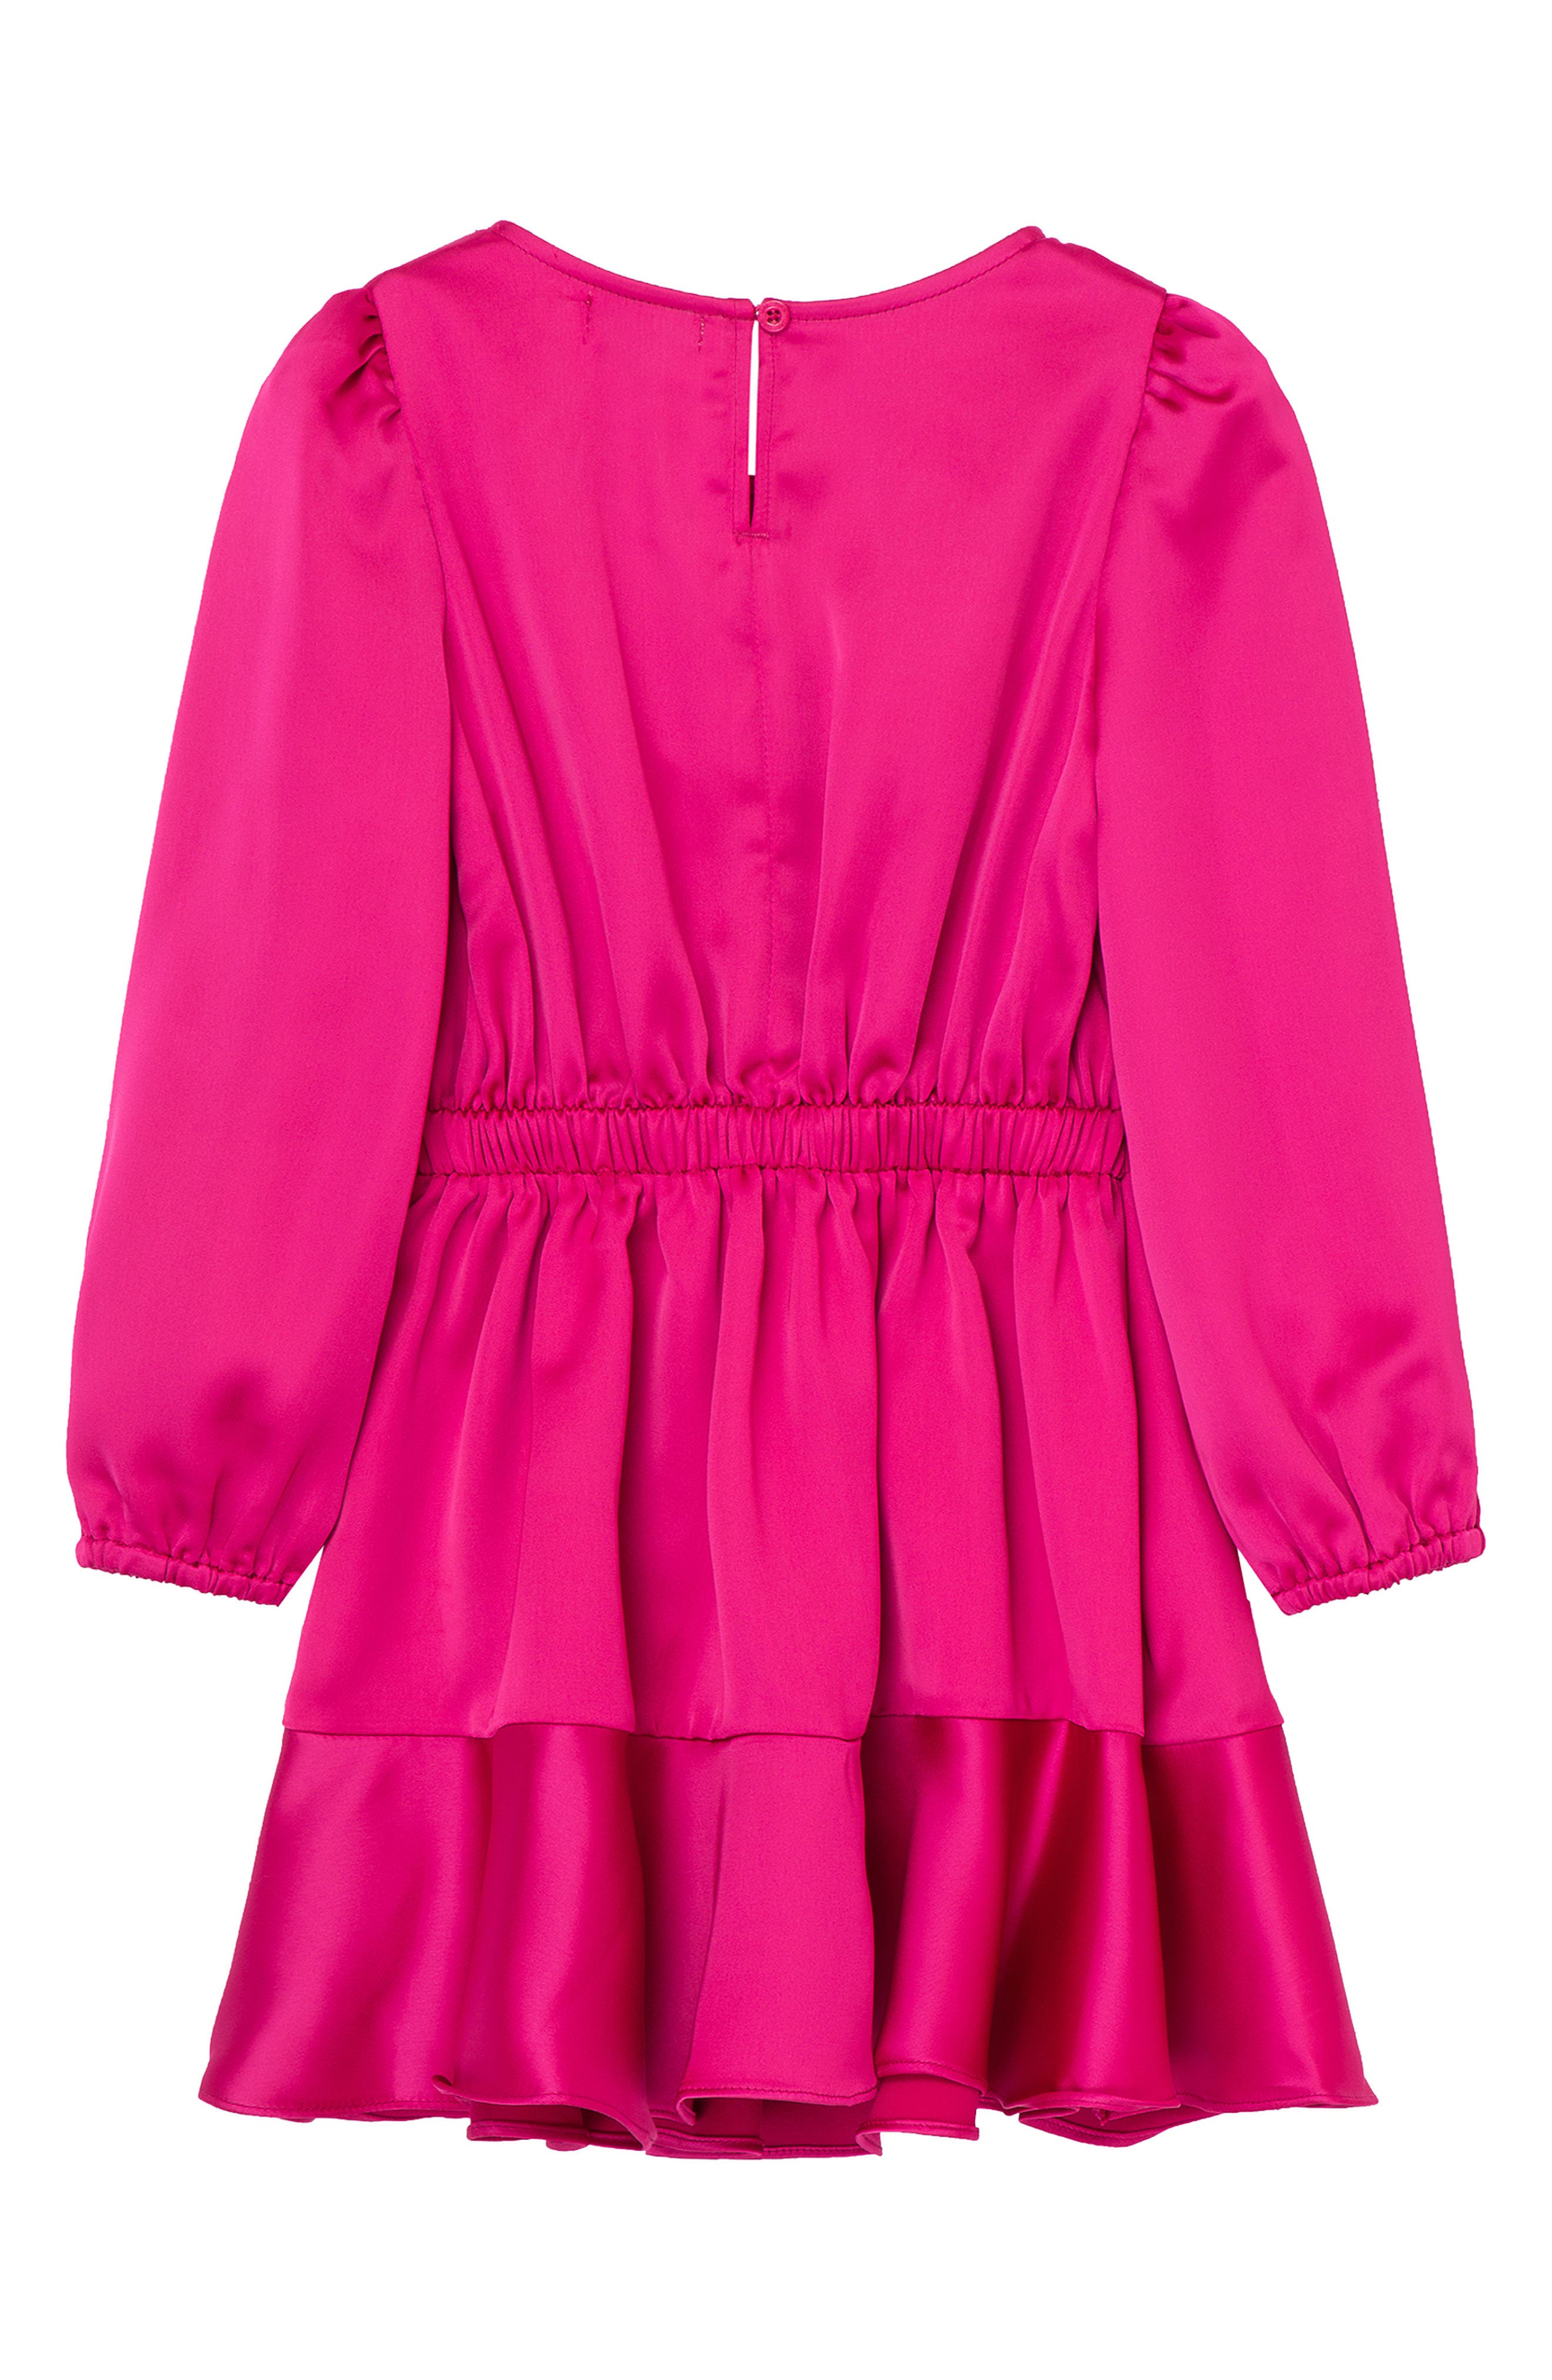 Nordstrom Clothing Dresses Long Sleeve Dresses Kids Ruffle Long Sleeve Satin Faux Wrap Dress in Dark Pink at Nordstrom 